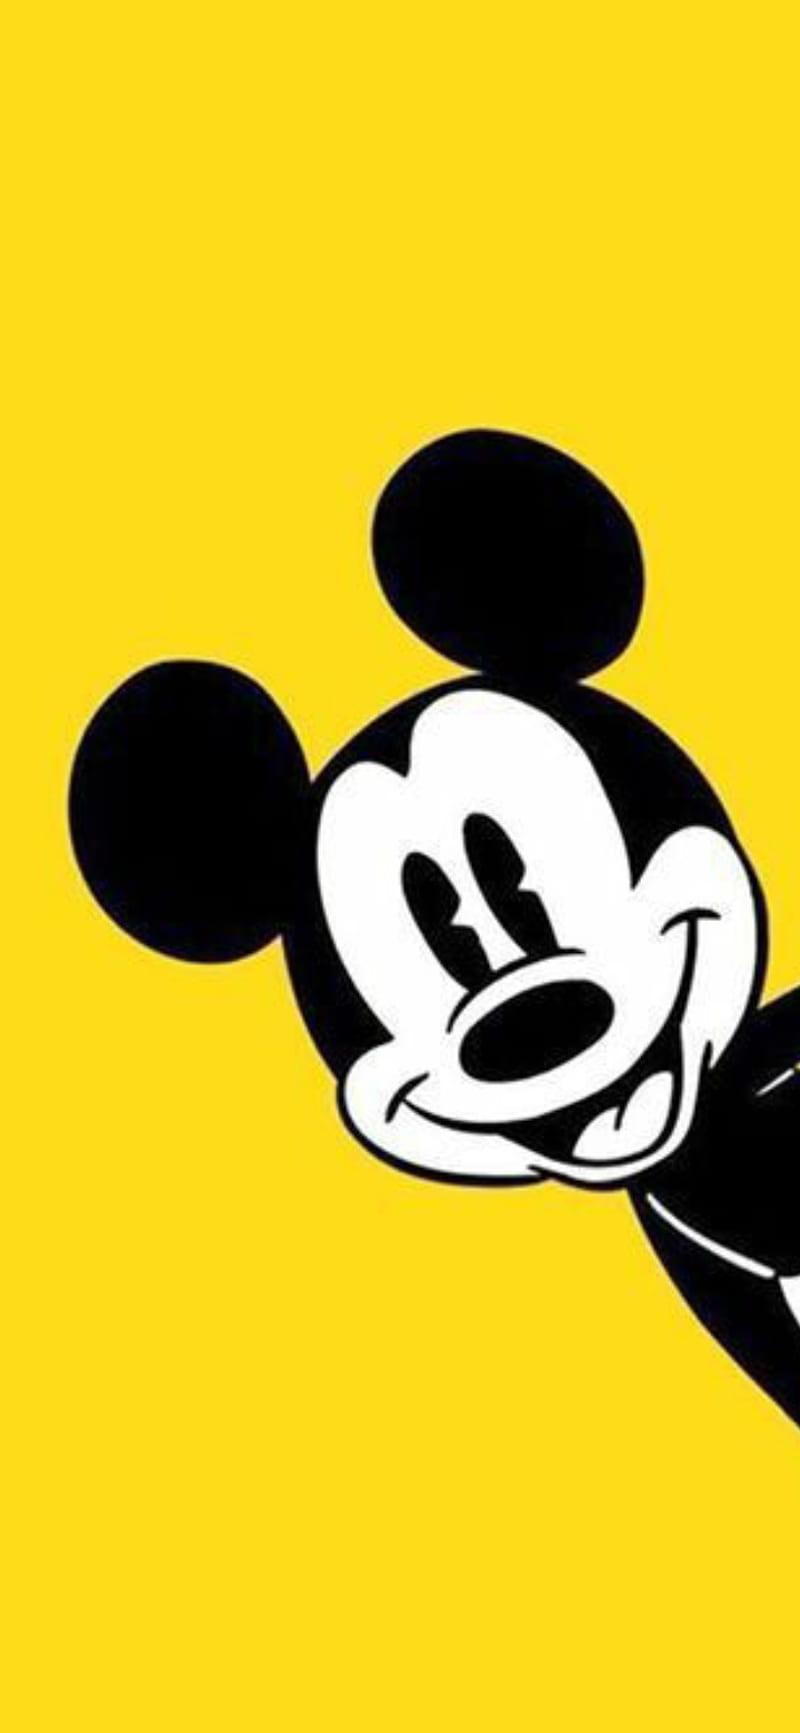 Mickey mouse wallpaper for your phone - Mickey Mouse